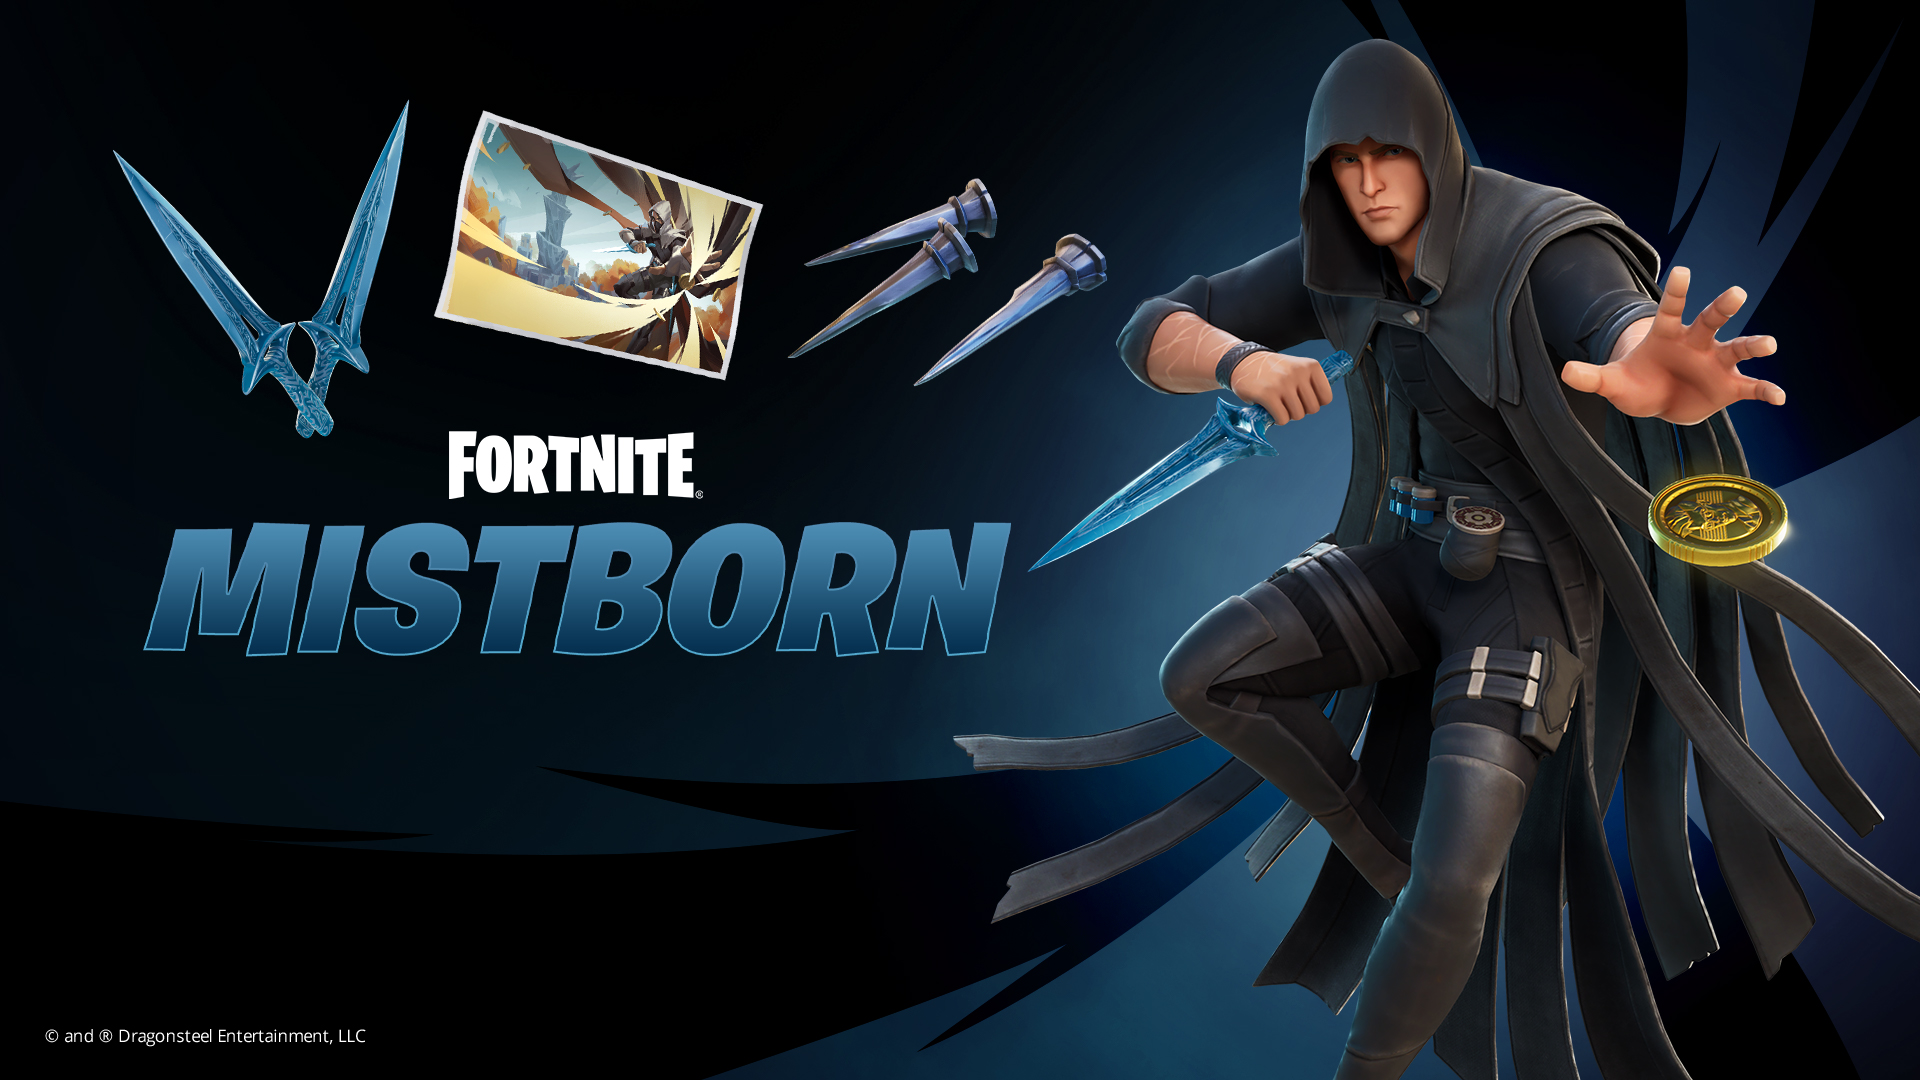 The first Fortnite teaser showed a collaboration with Mistborn 